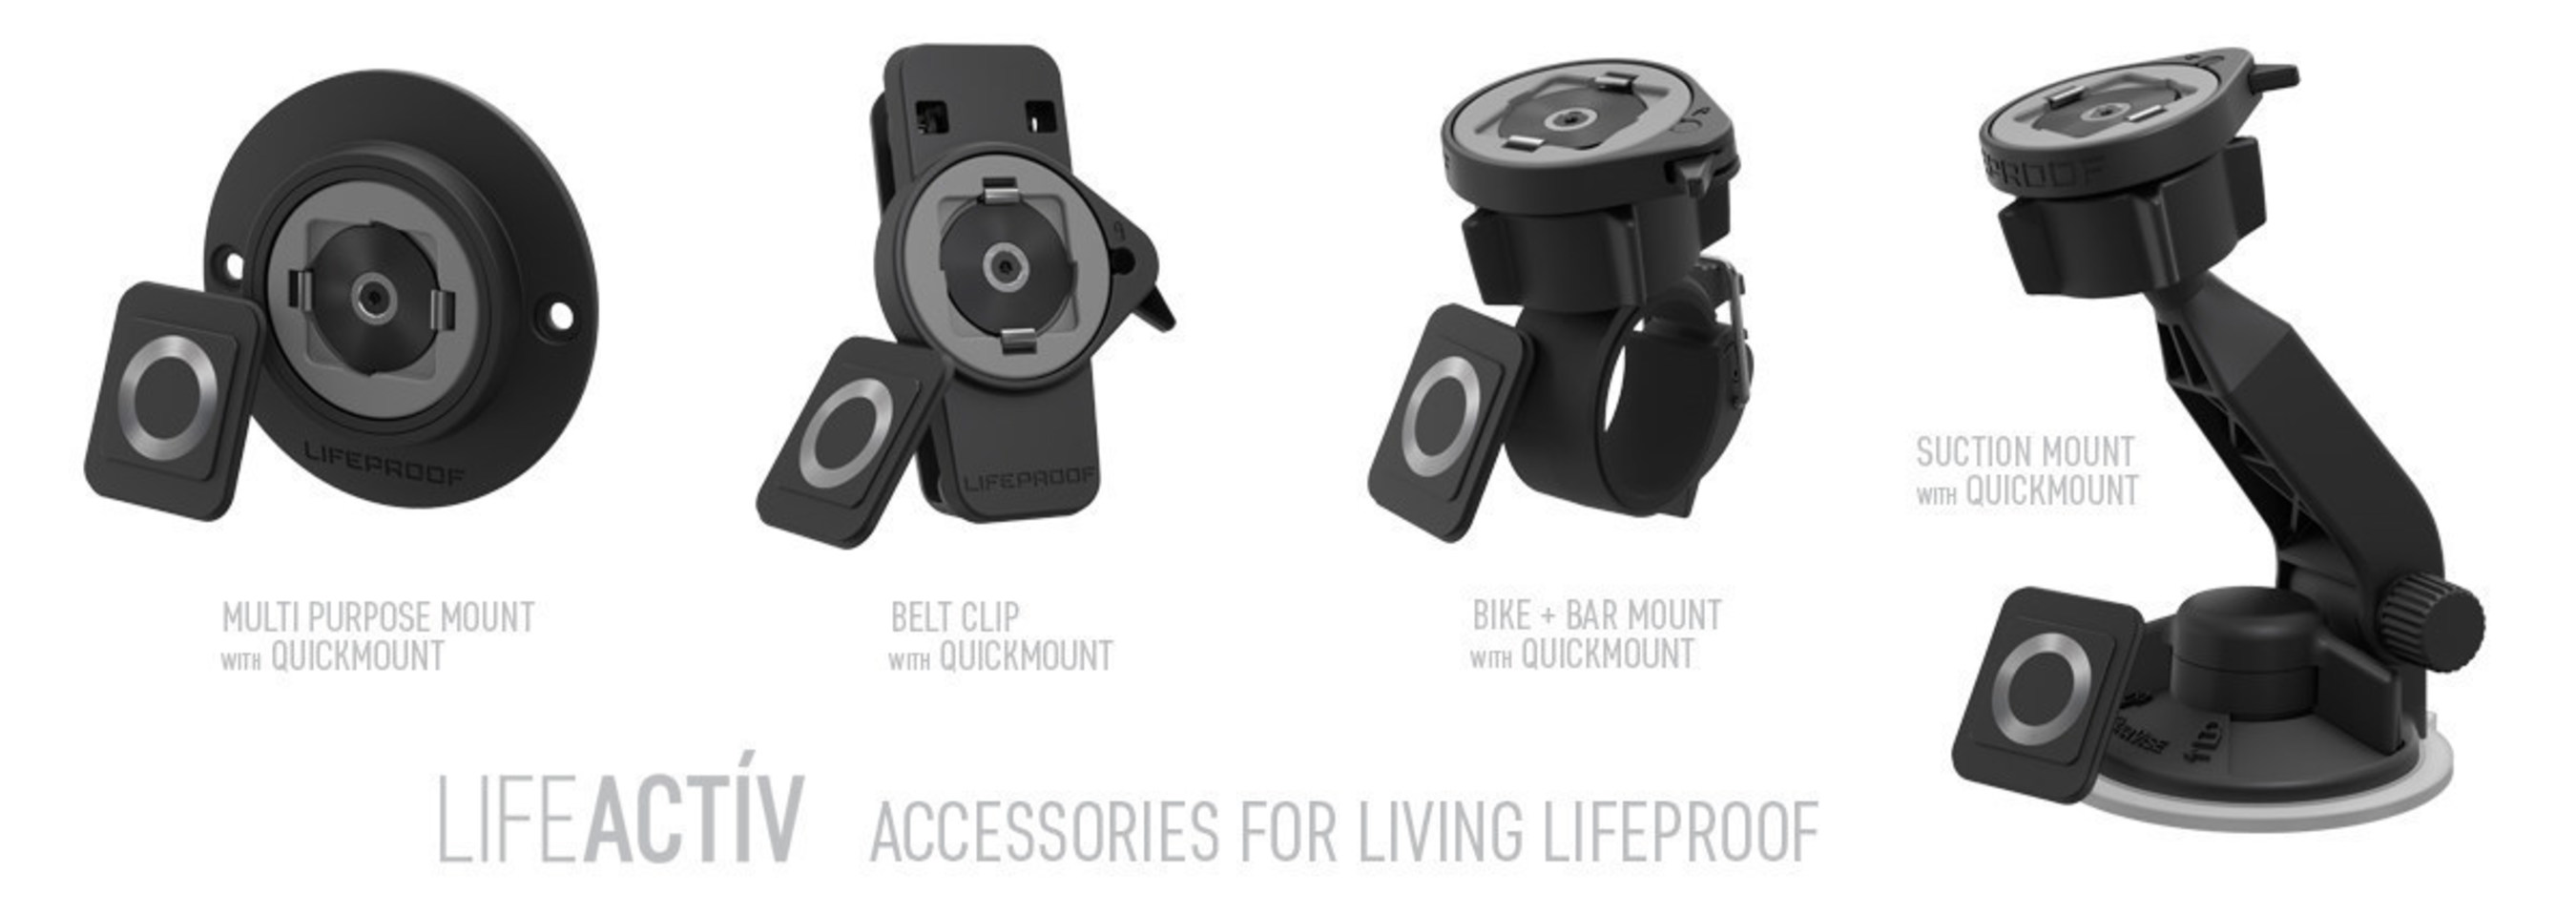 LIFEACTIV universal accessories from LifeProof available now on lifeproof.com.